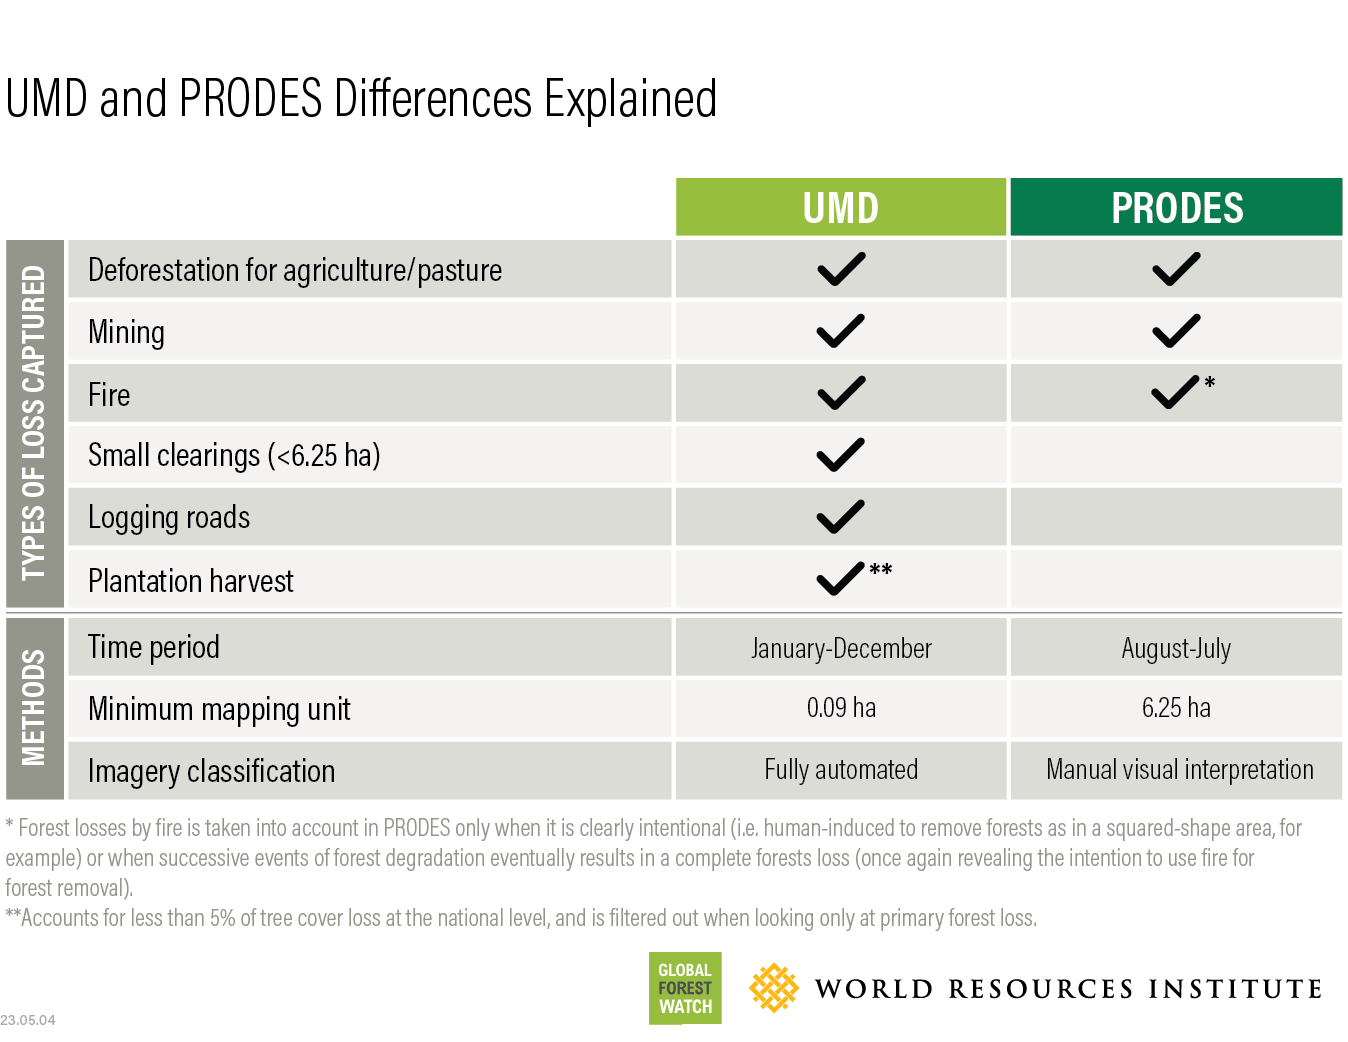 UMD and PRODES differences explained